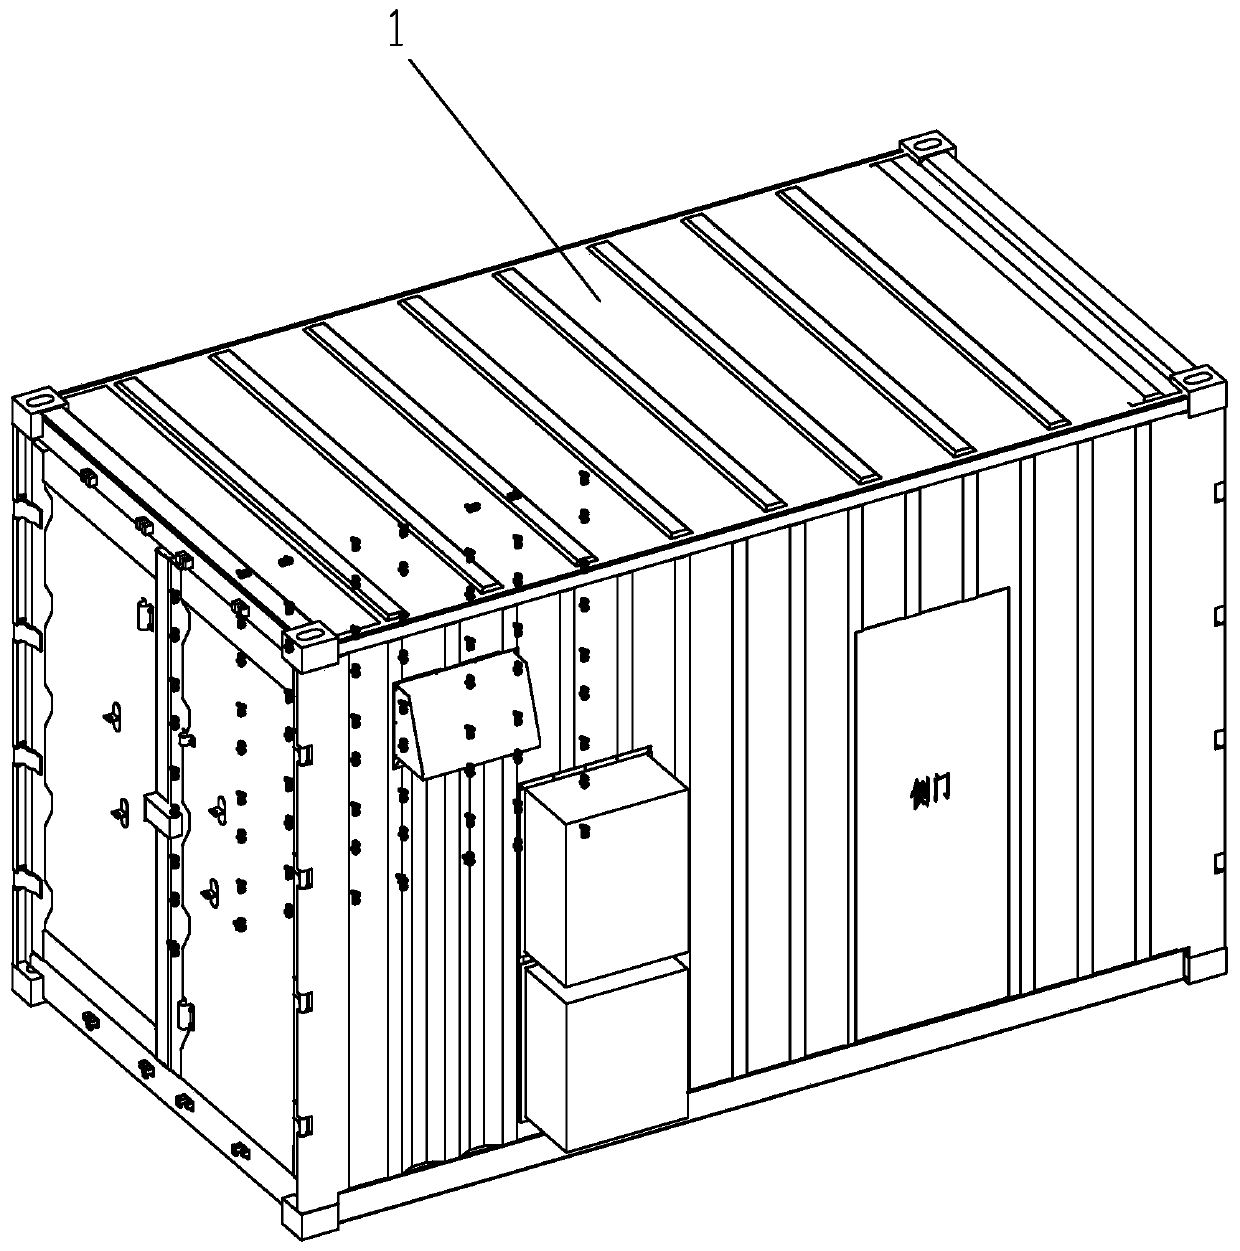 Efficient thermal management energy storage container